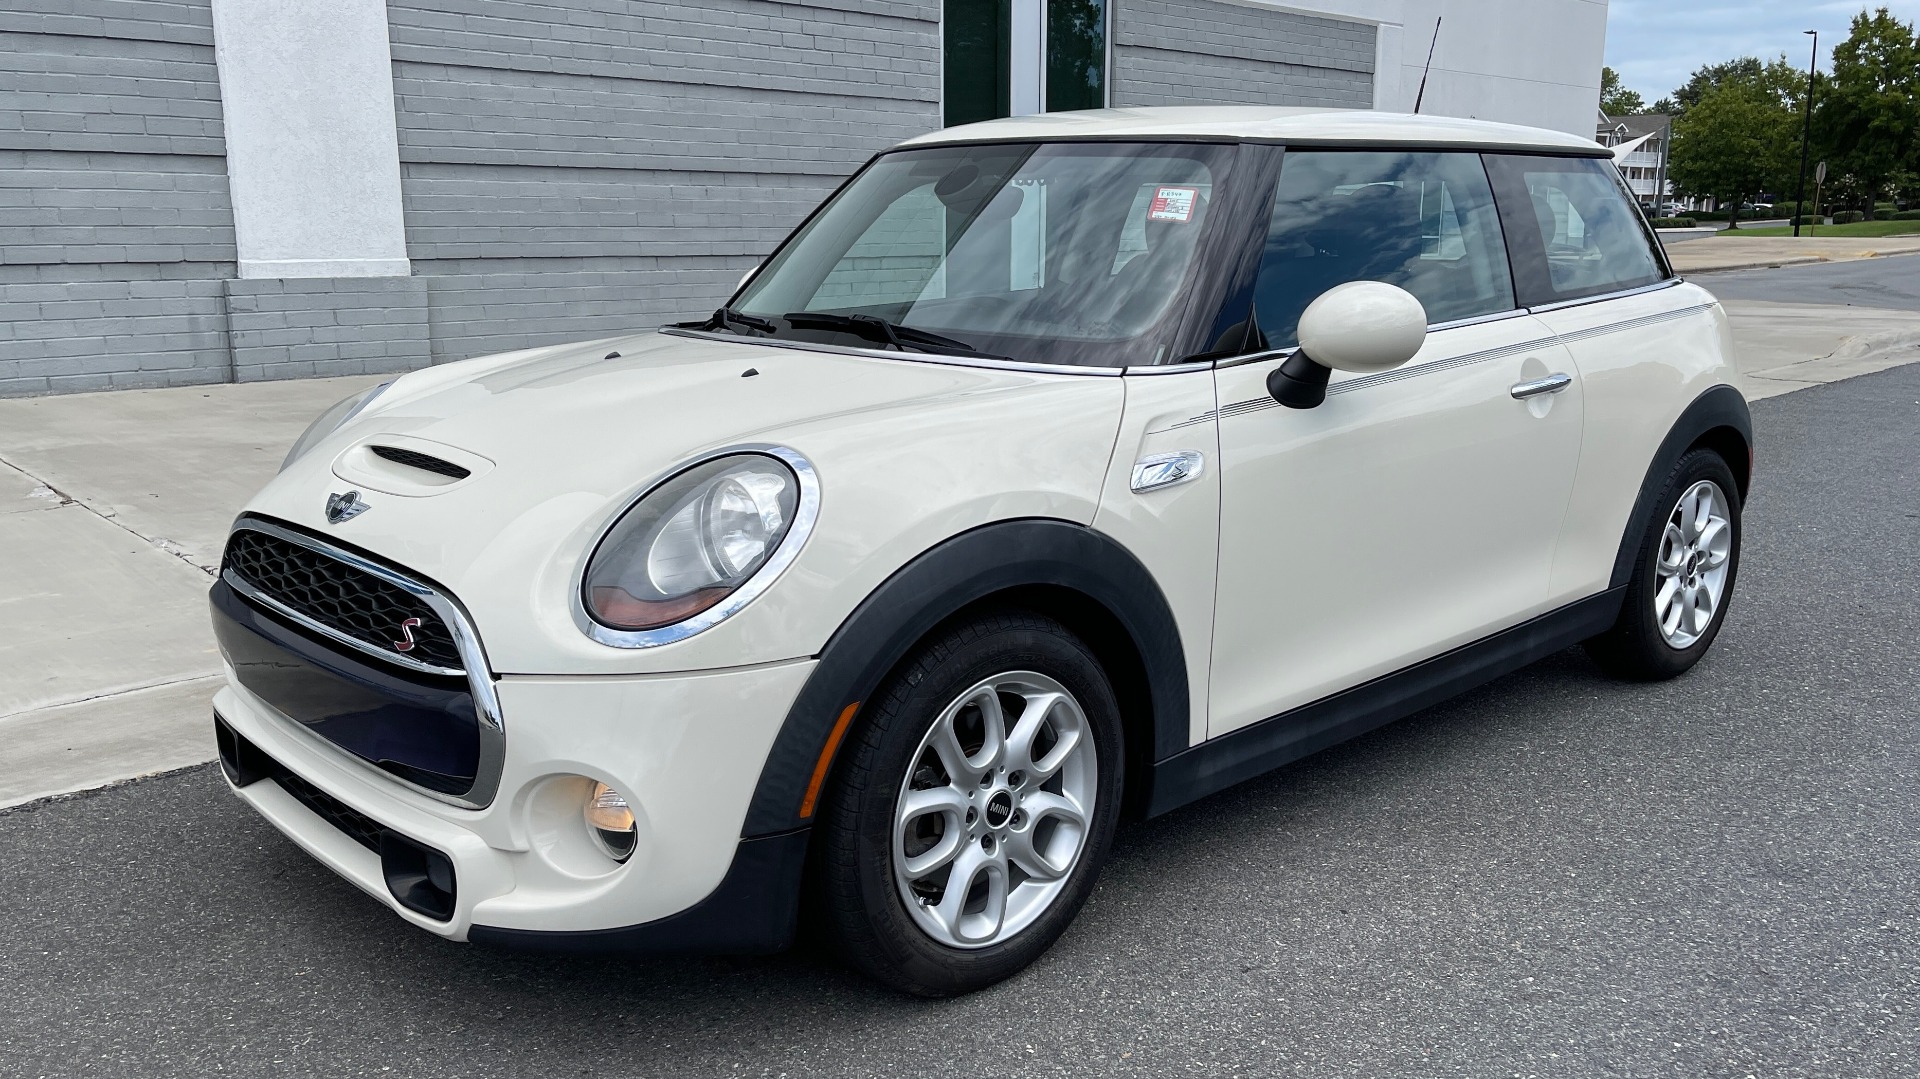 Used 2015 MINI COOPER HARDTOP S 2DR / 2.0L TURBO / FWD / 6-SPD MANUAL for sale Sold at Formula Imports in Charlotte NC 28227 2